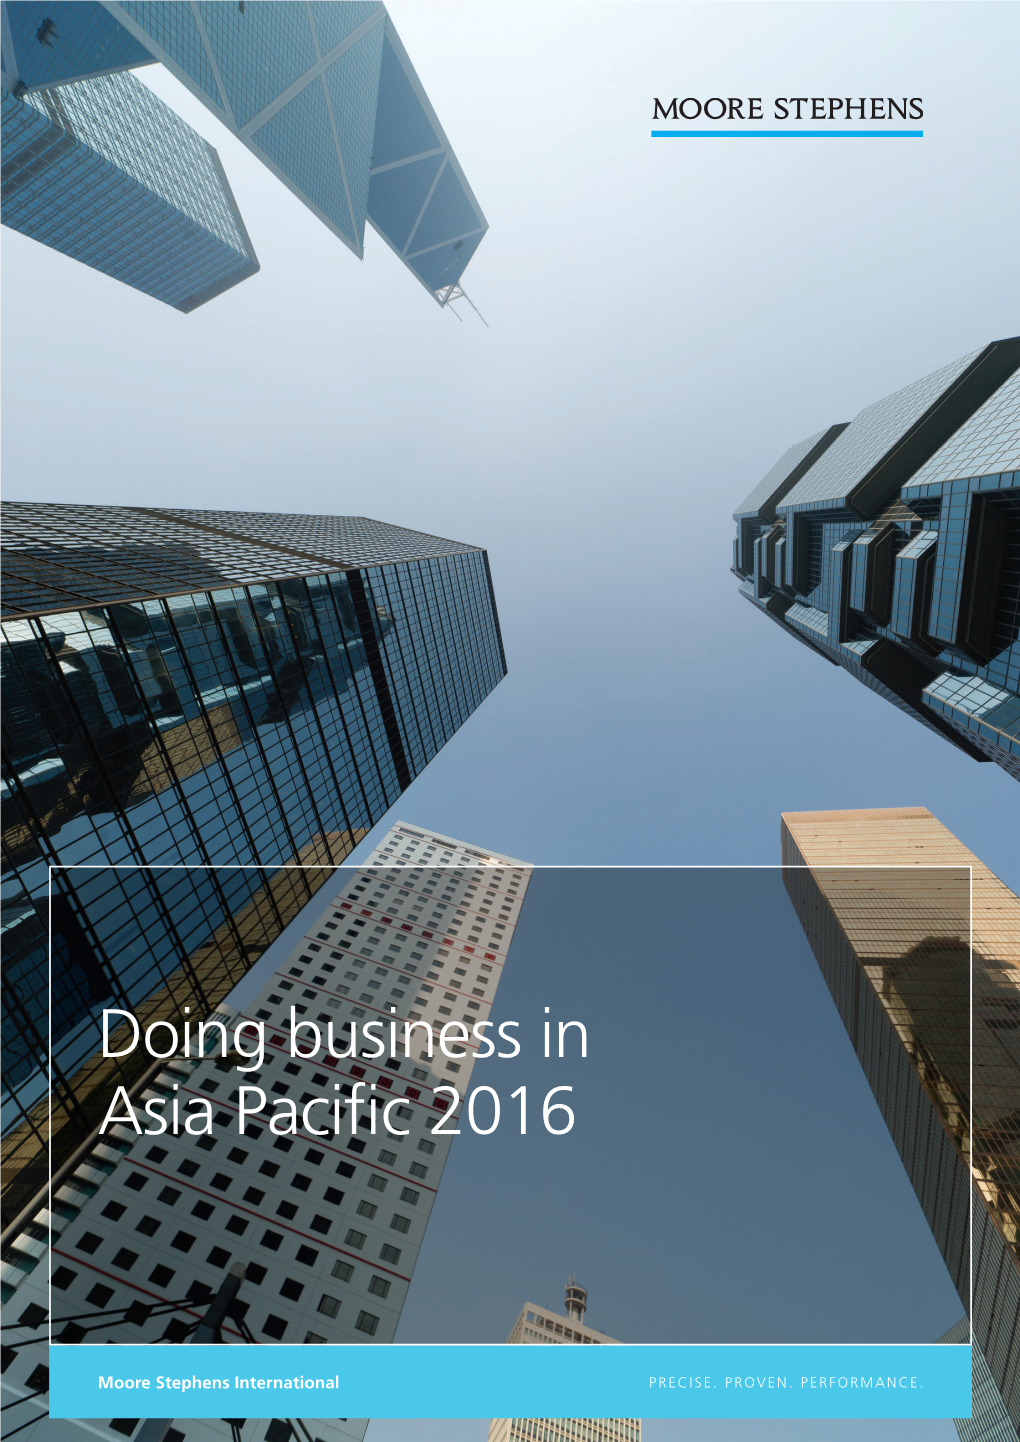 DPS31984 Doing Business in Asia Pacific 2016.Indd